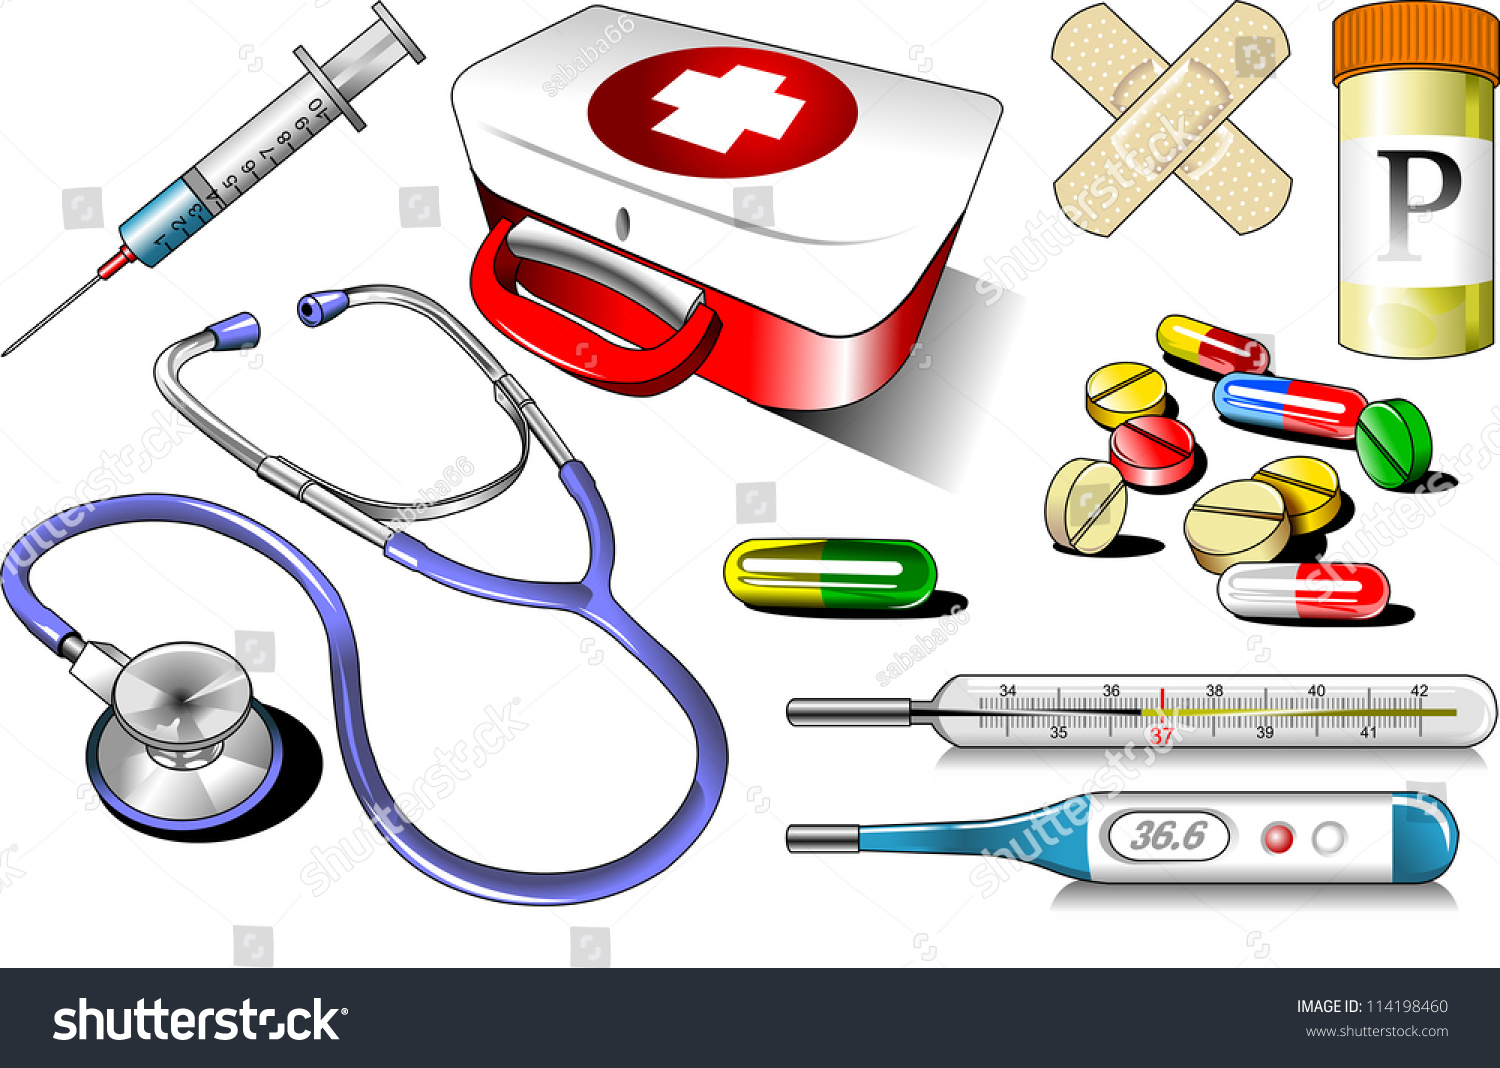 medical clipart collection - photo #33